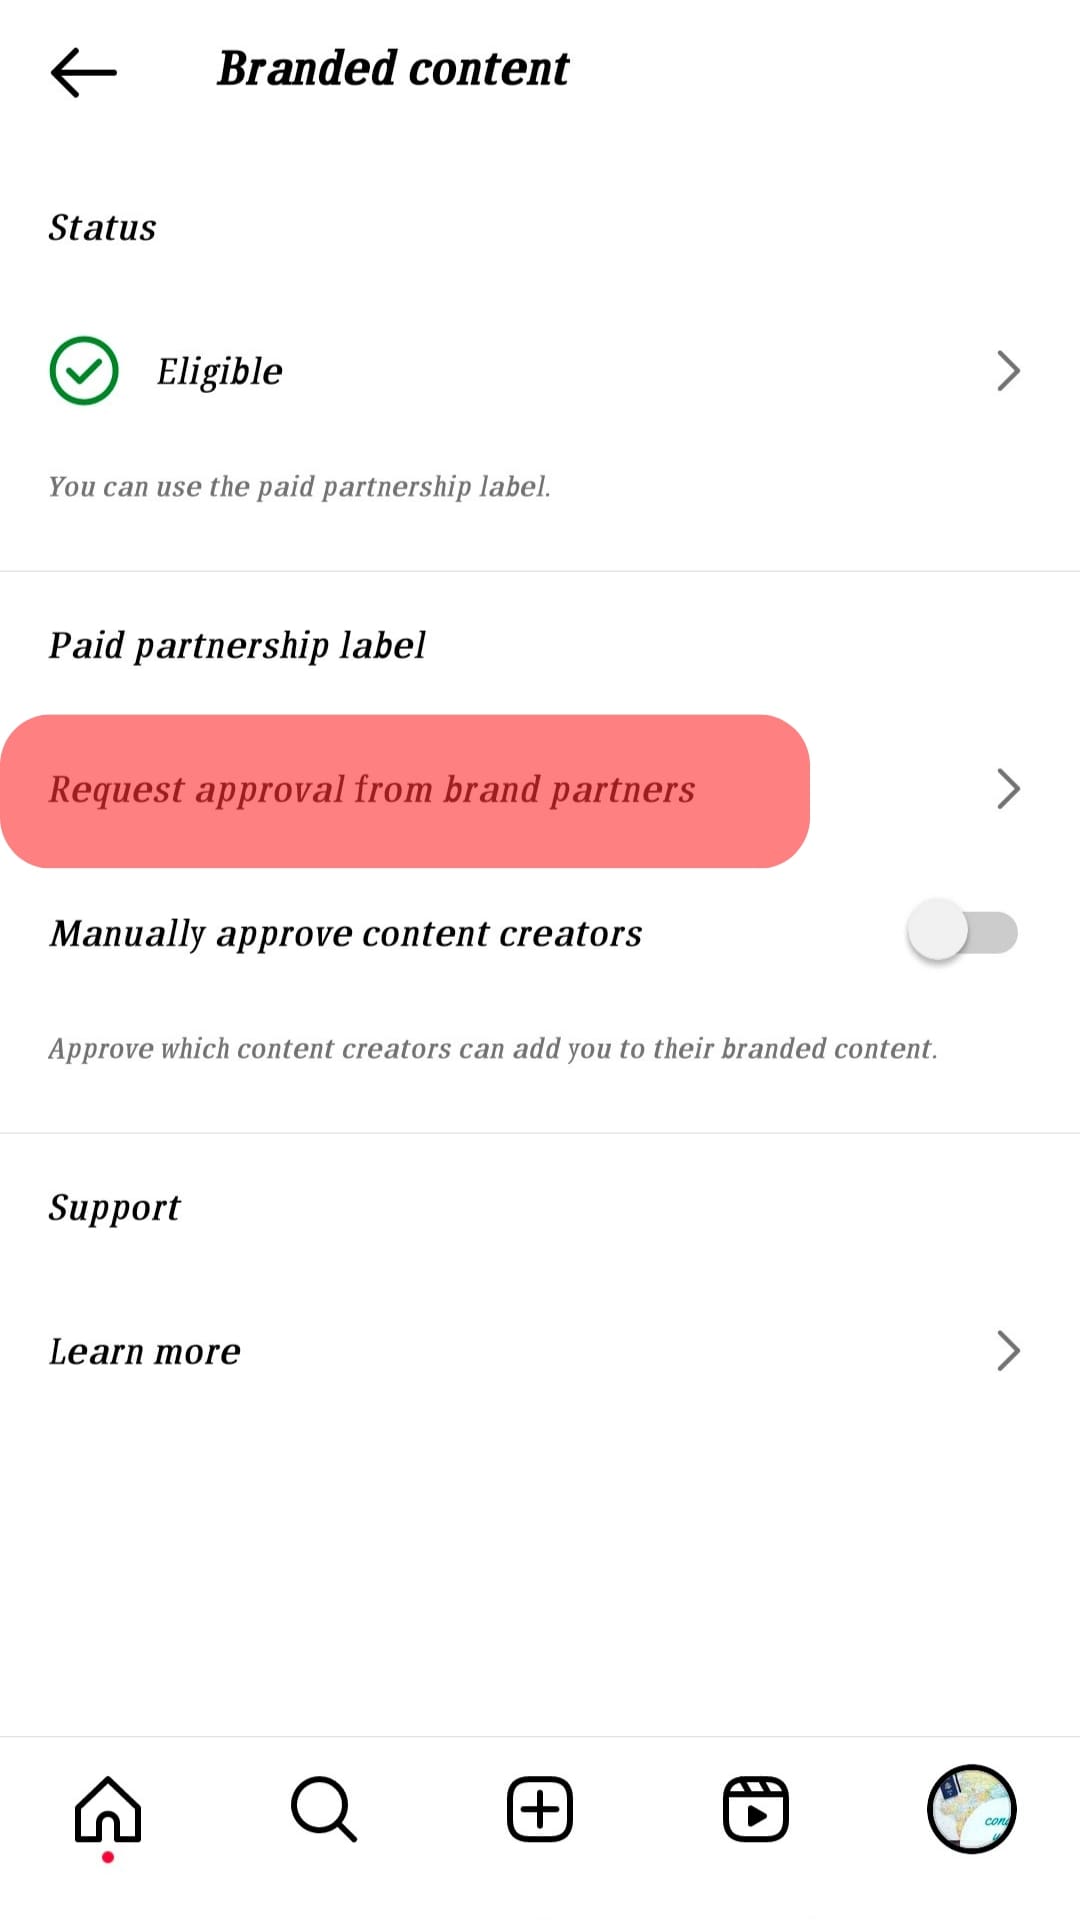 Click The Request Approval From Brand Partners Option.